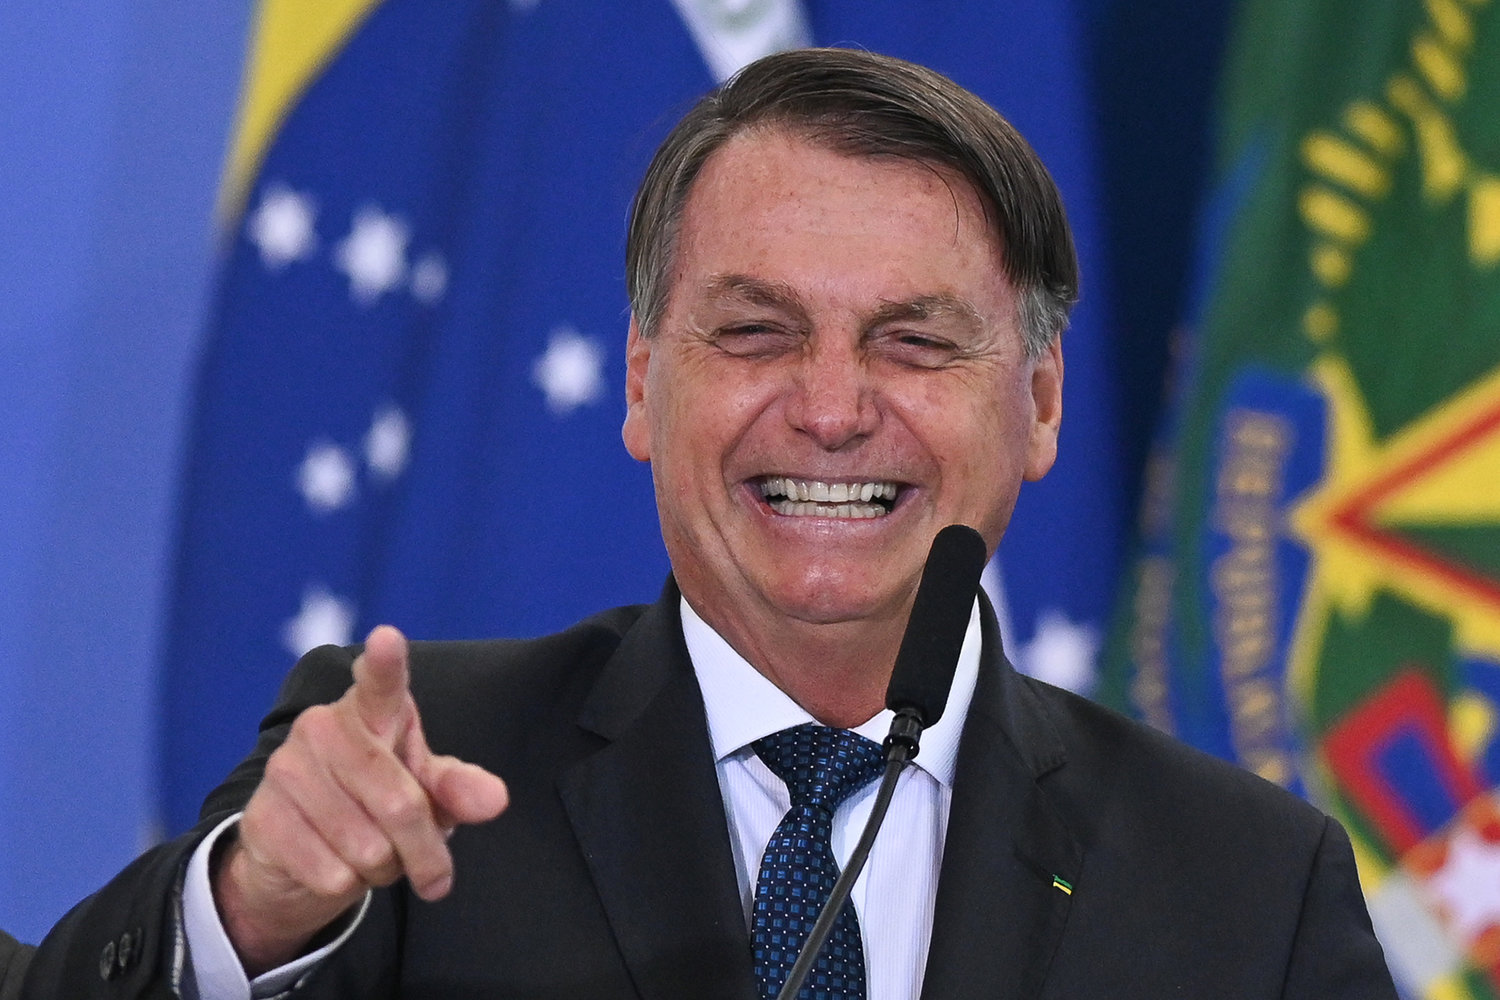 Brazil President Jair Bolsonaro, shown in December 2020, criticized  the country’s electronic voting system on Sunday, rousing supporters who took to the streets in major cities over fears of cheating in next year’s election. (Andre Borges/NurPhoto/Zuma Press/TNS)